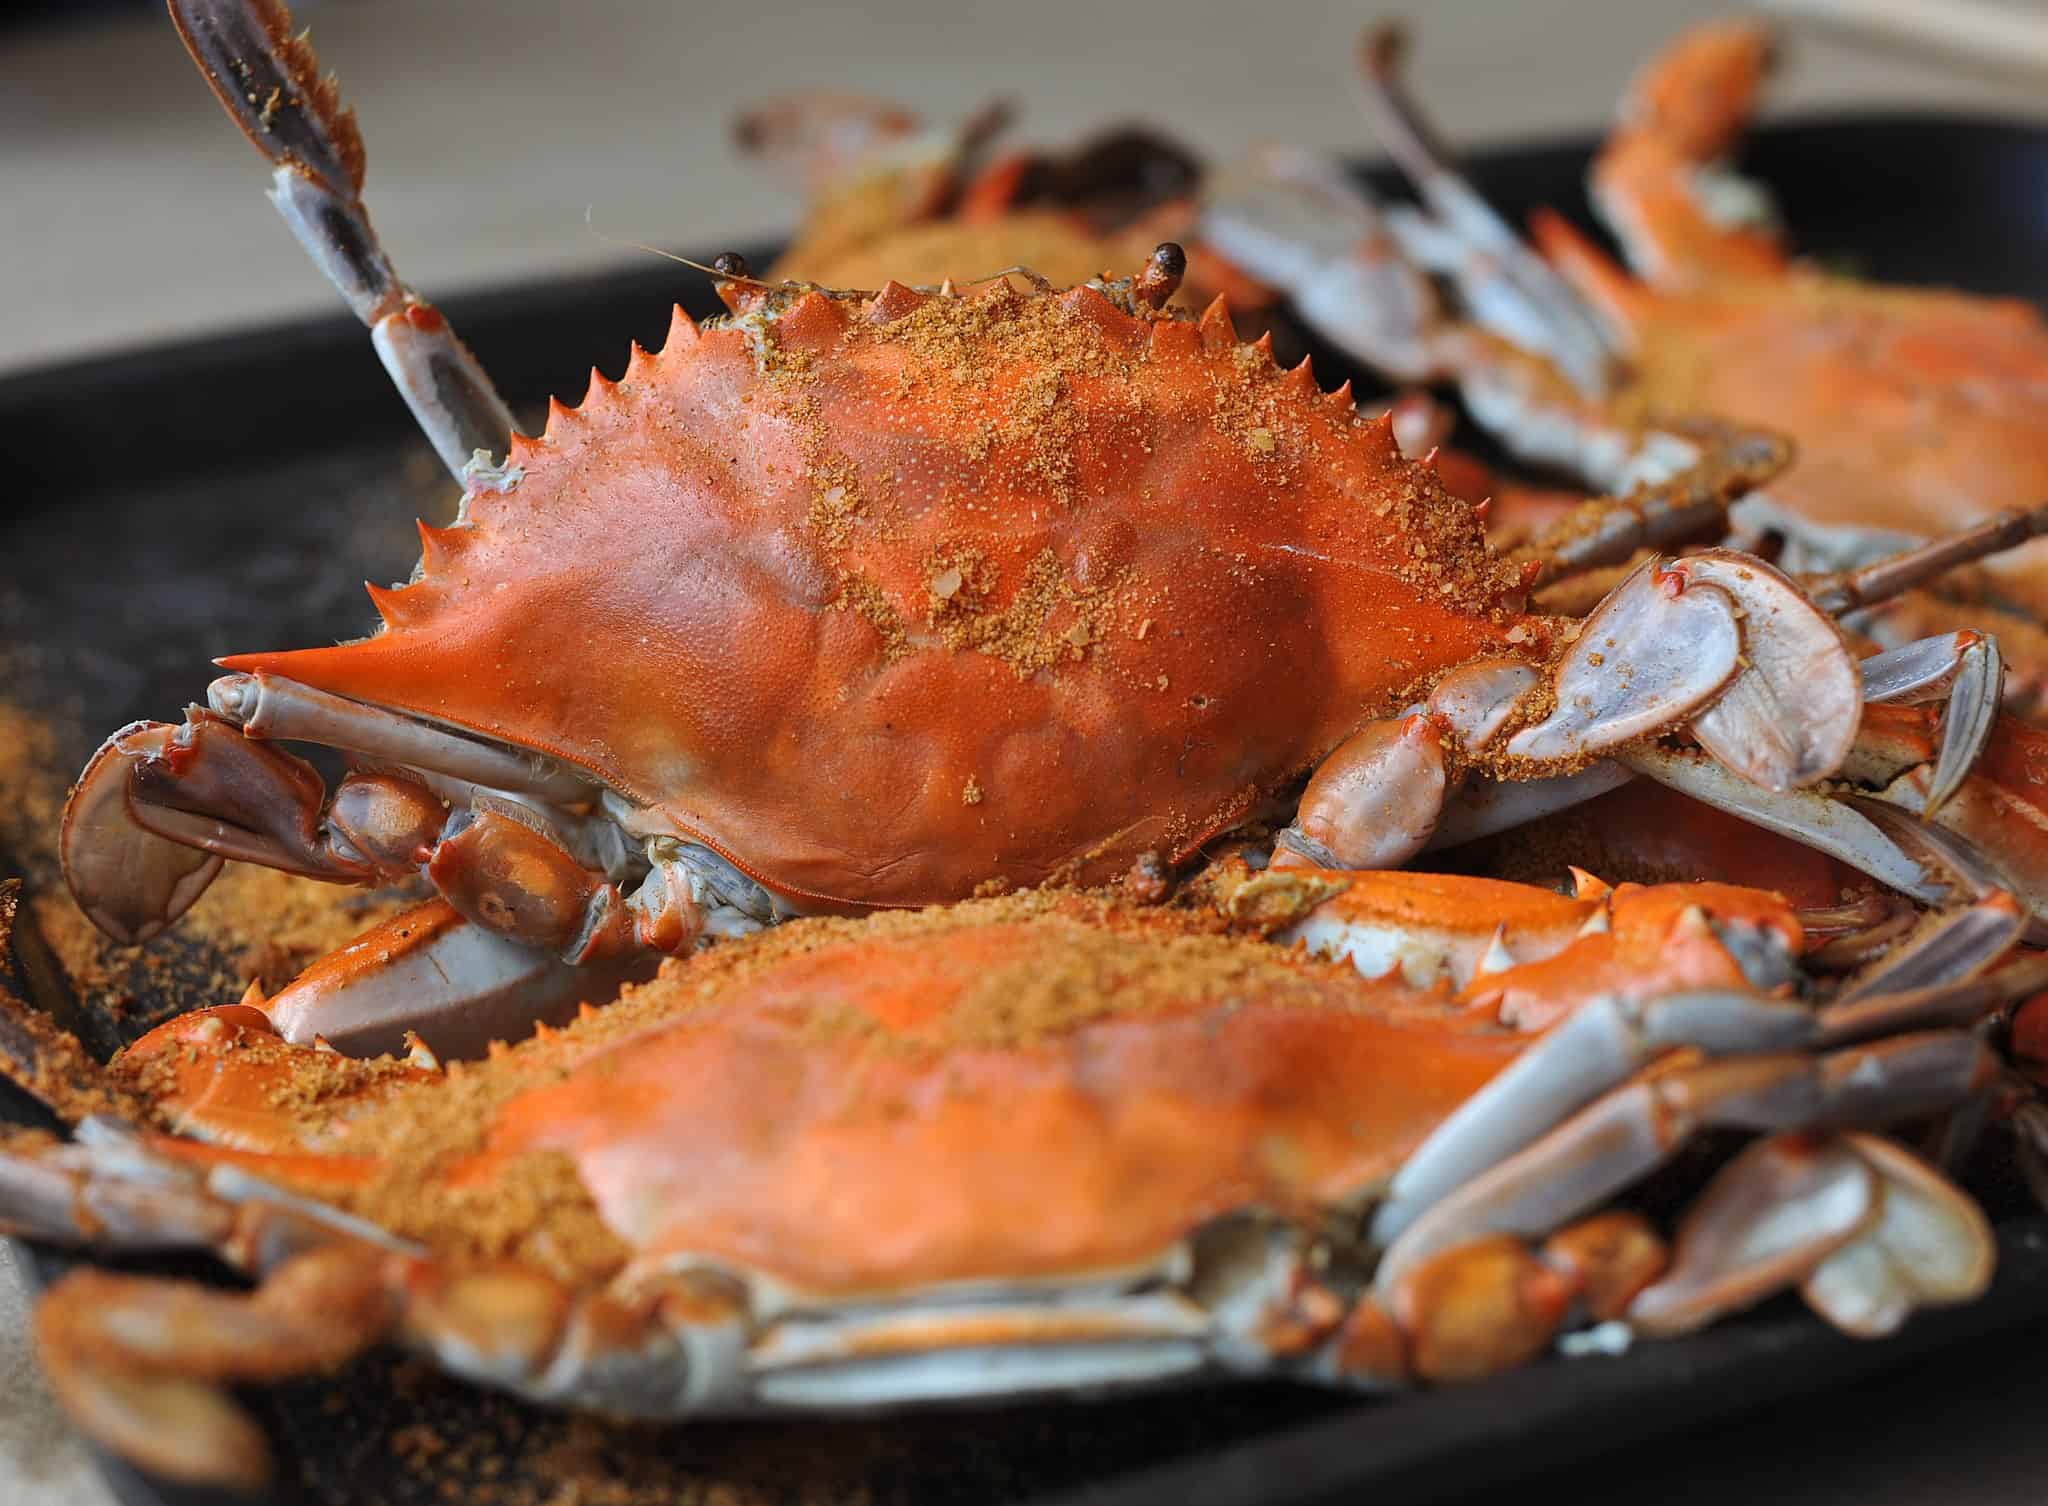 Steamed blue crab is a staple of Maryland and is always caught fresh.